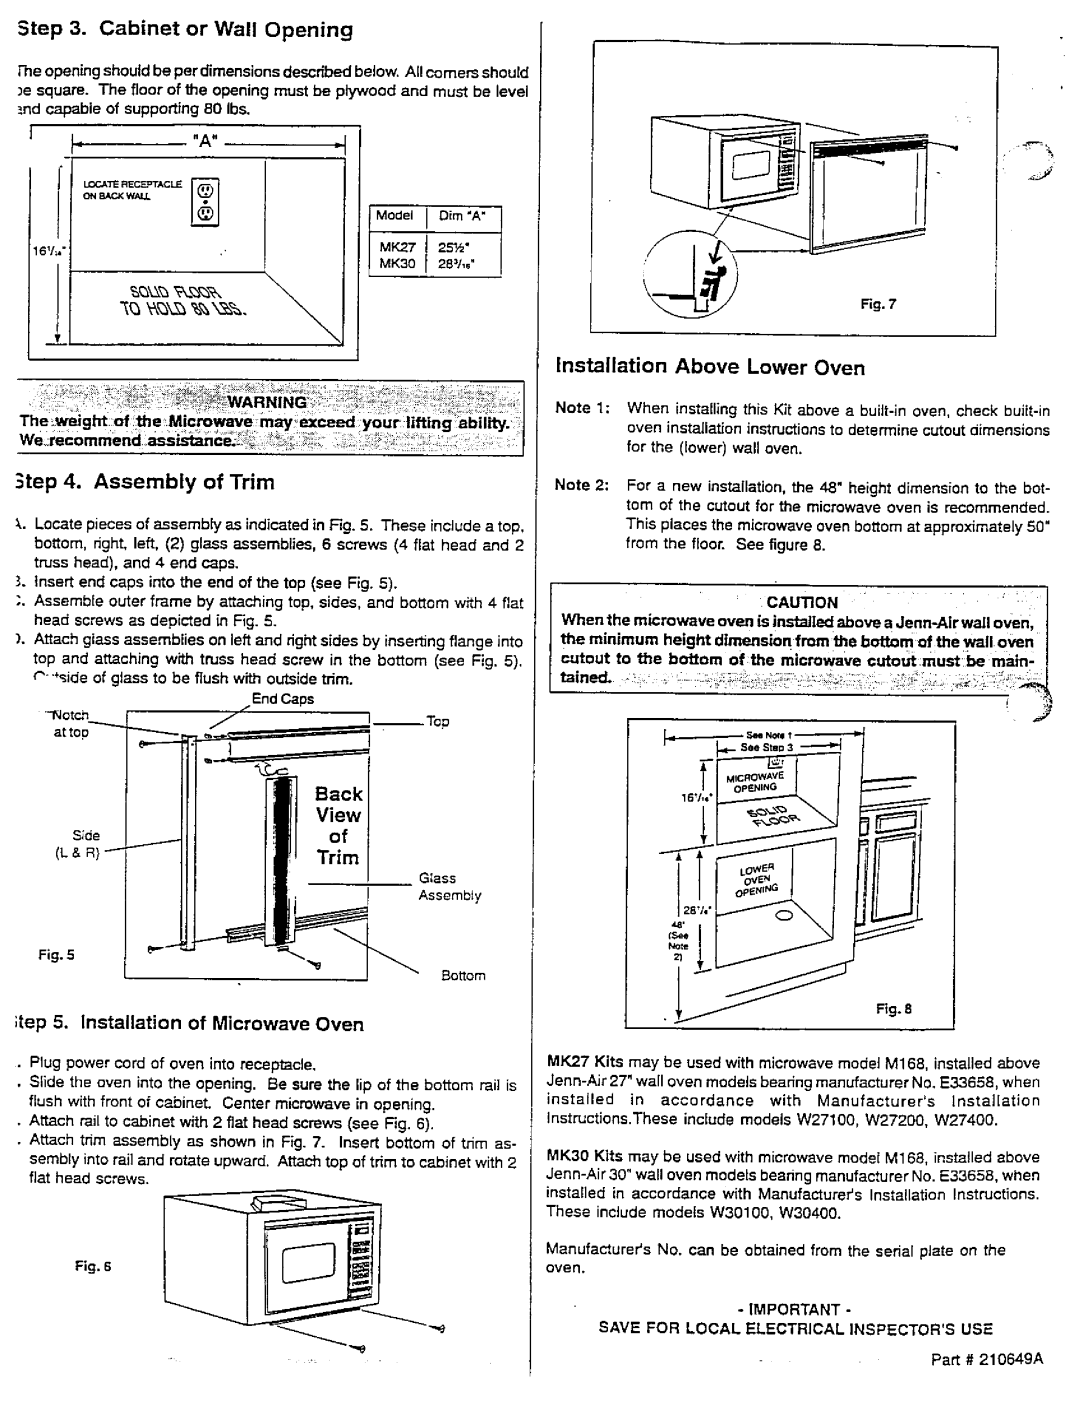 Jenn-Air MK30 Assembly of Trim, Ill Trim, I I I#11, Cabinet or Wall Opening, iv, Installation Above Lower Oven, be main 